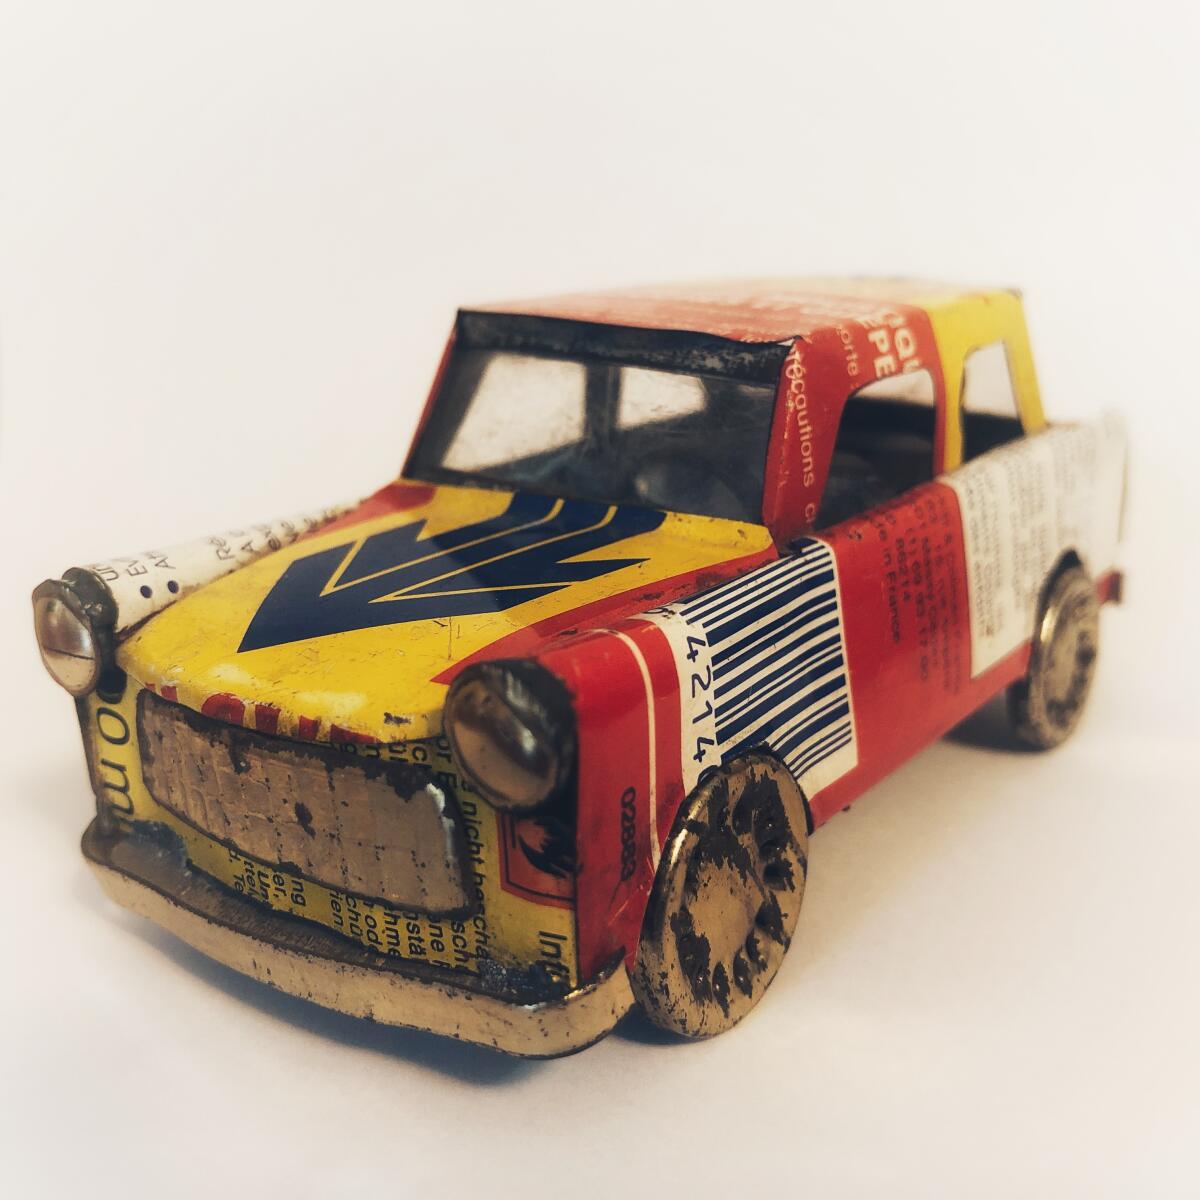 Toy Trabant, 5 inches long, Berlin, circa 1995.